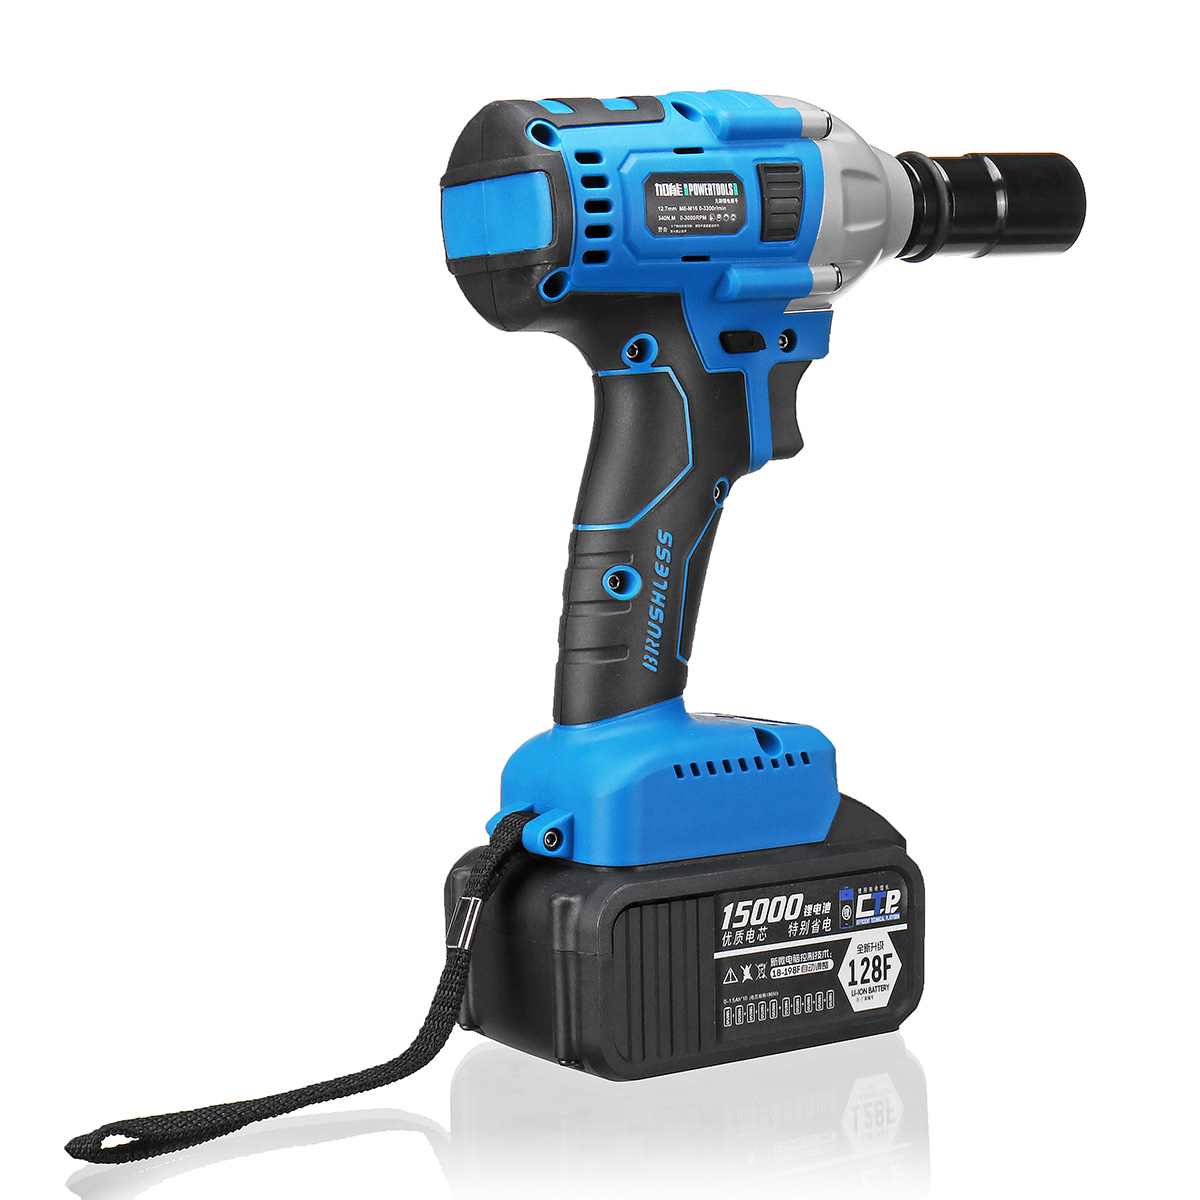 15000mAh-Electric-Impact-Wrench-340Nm-Cordless-Brushless-with-2-Lithium-Battery-1392865-8